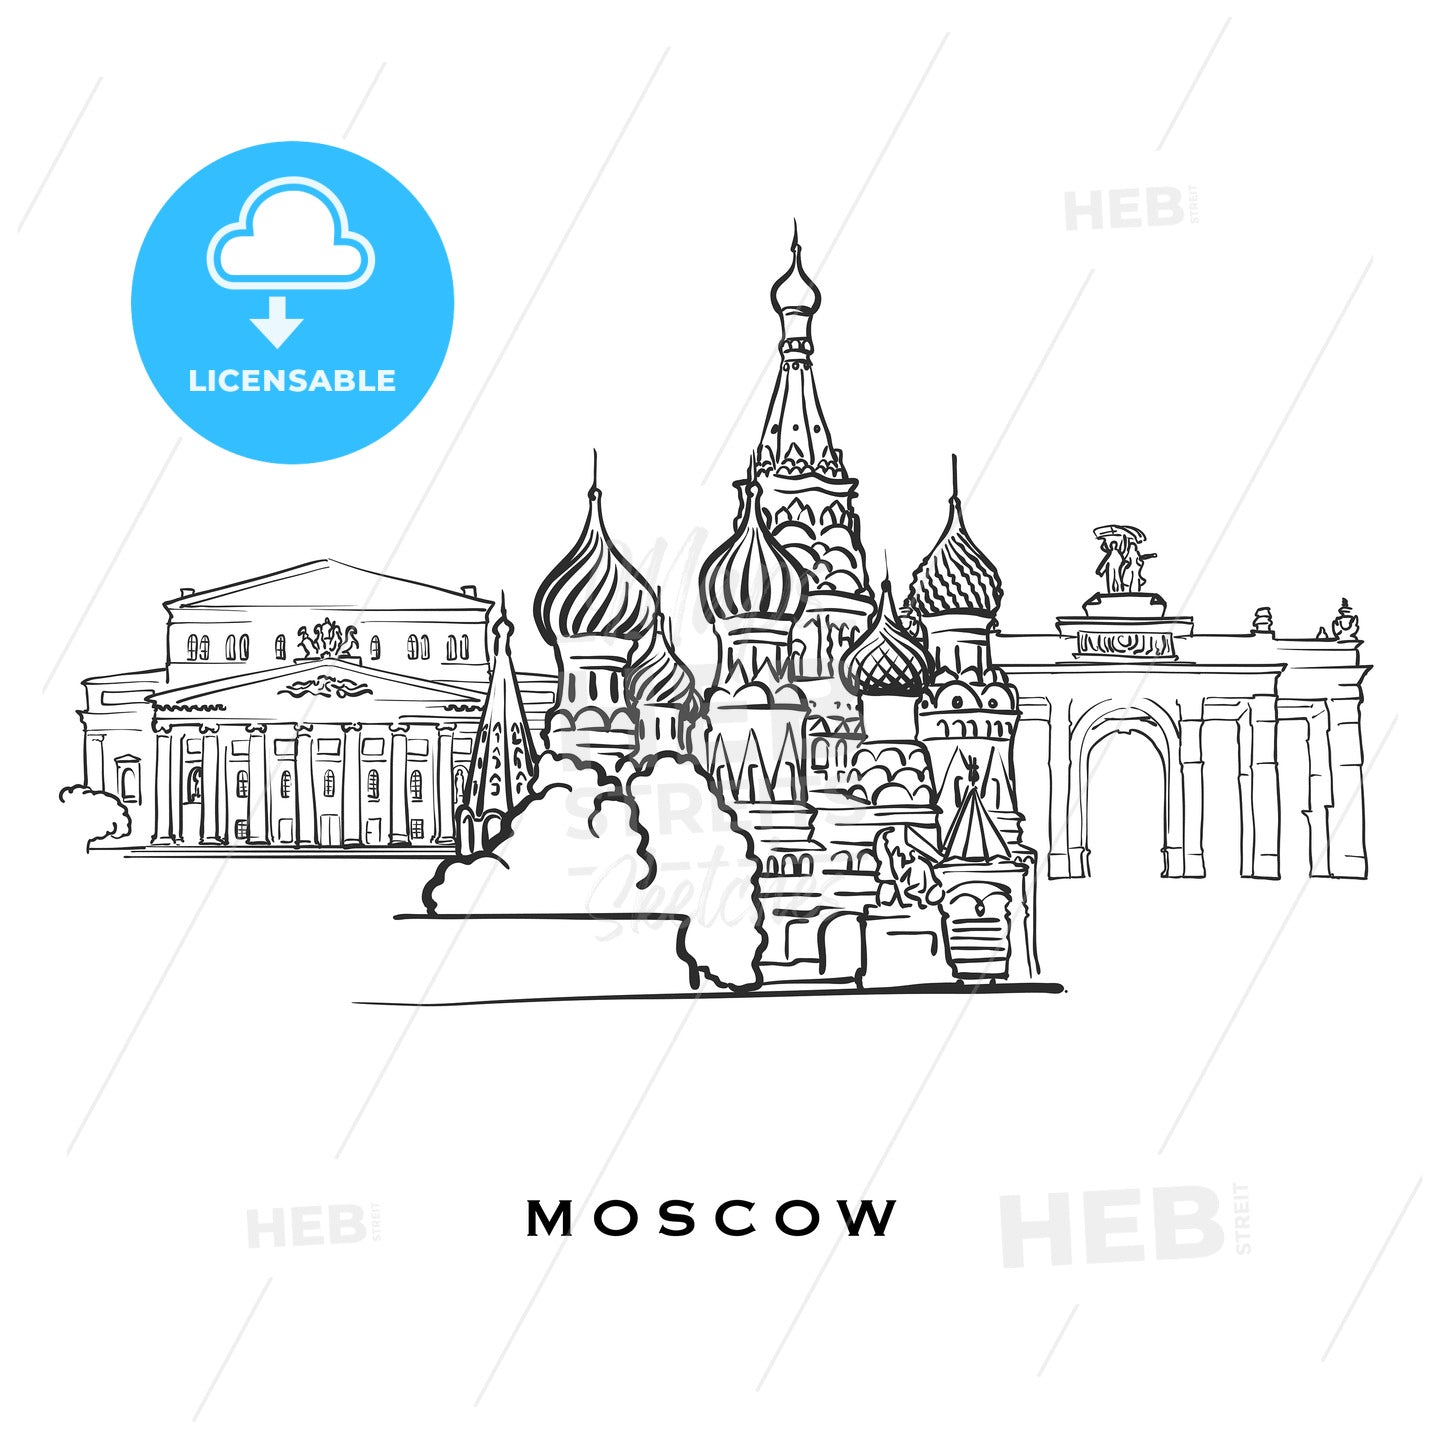 Moscow Russia famous architecture – instant download